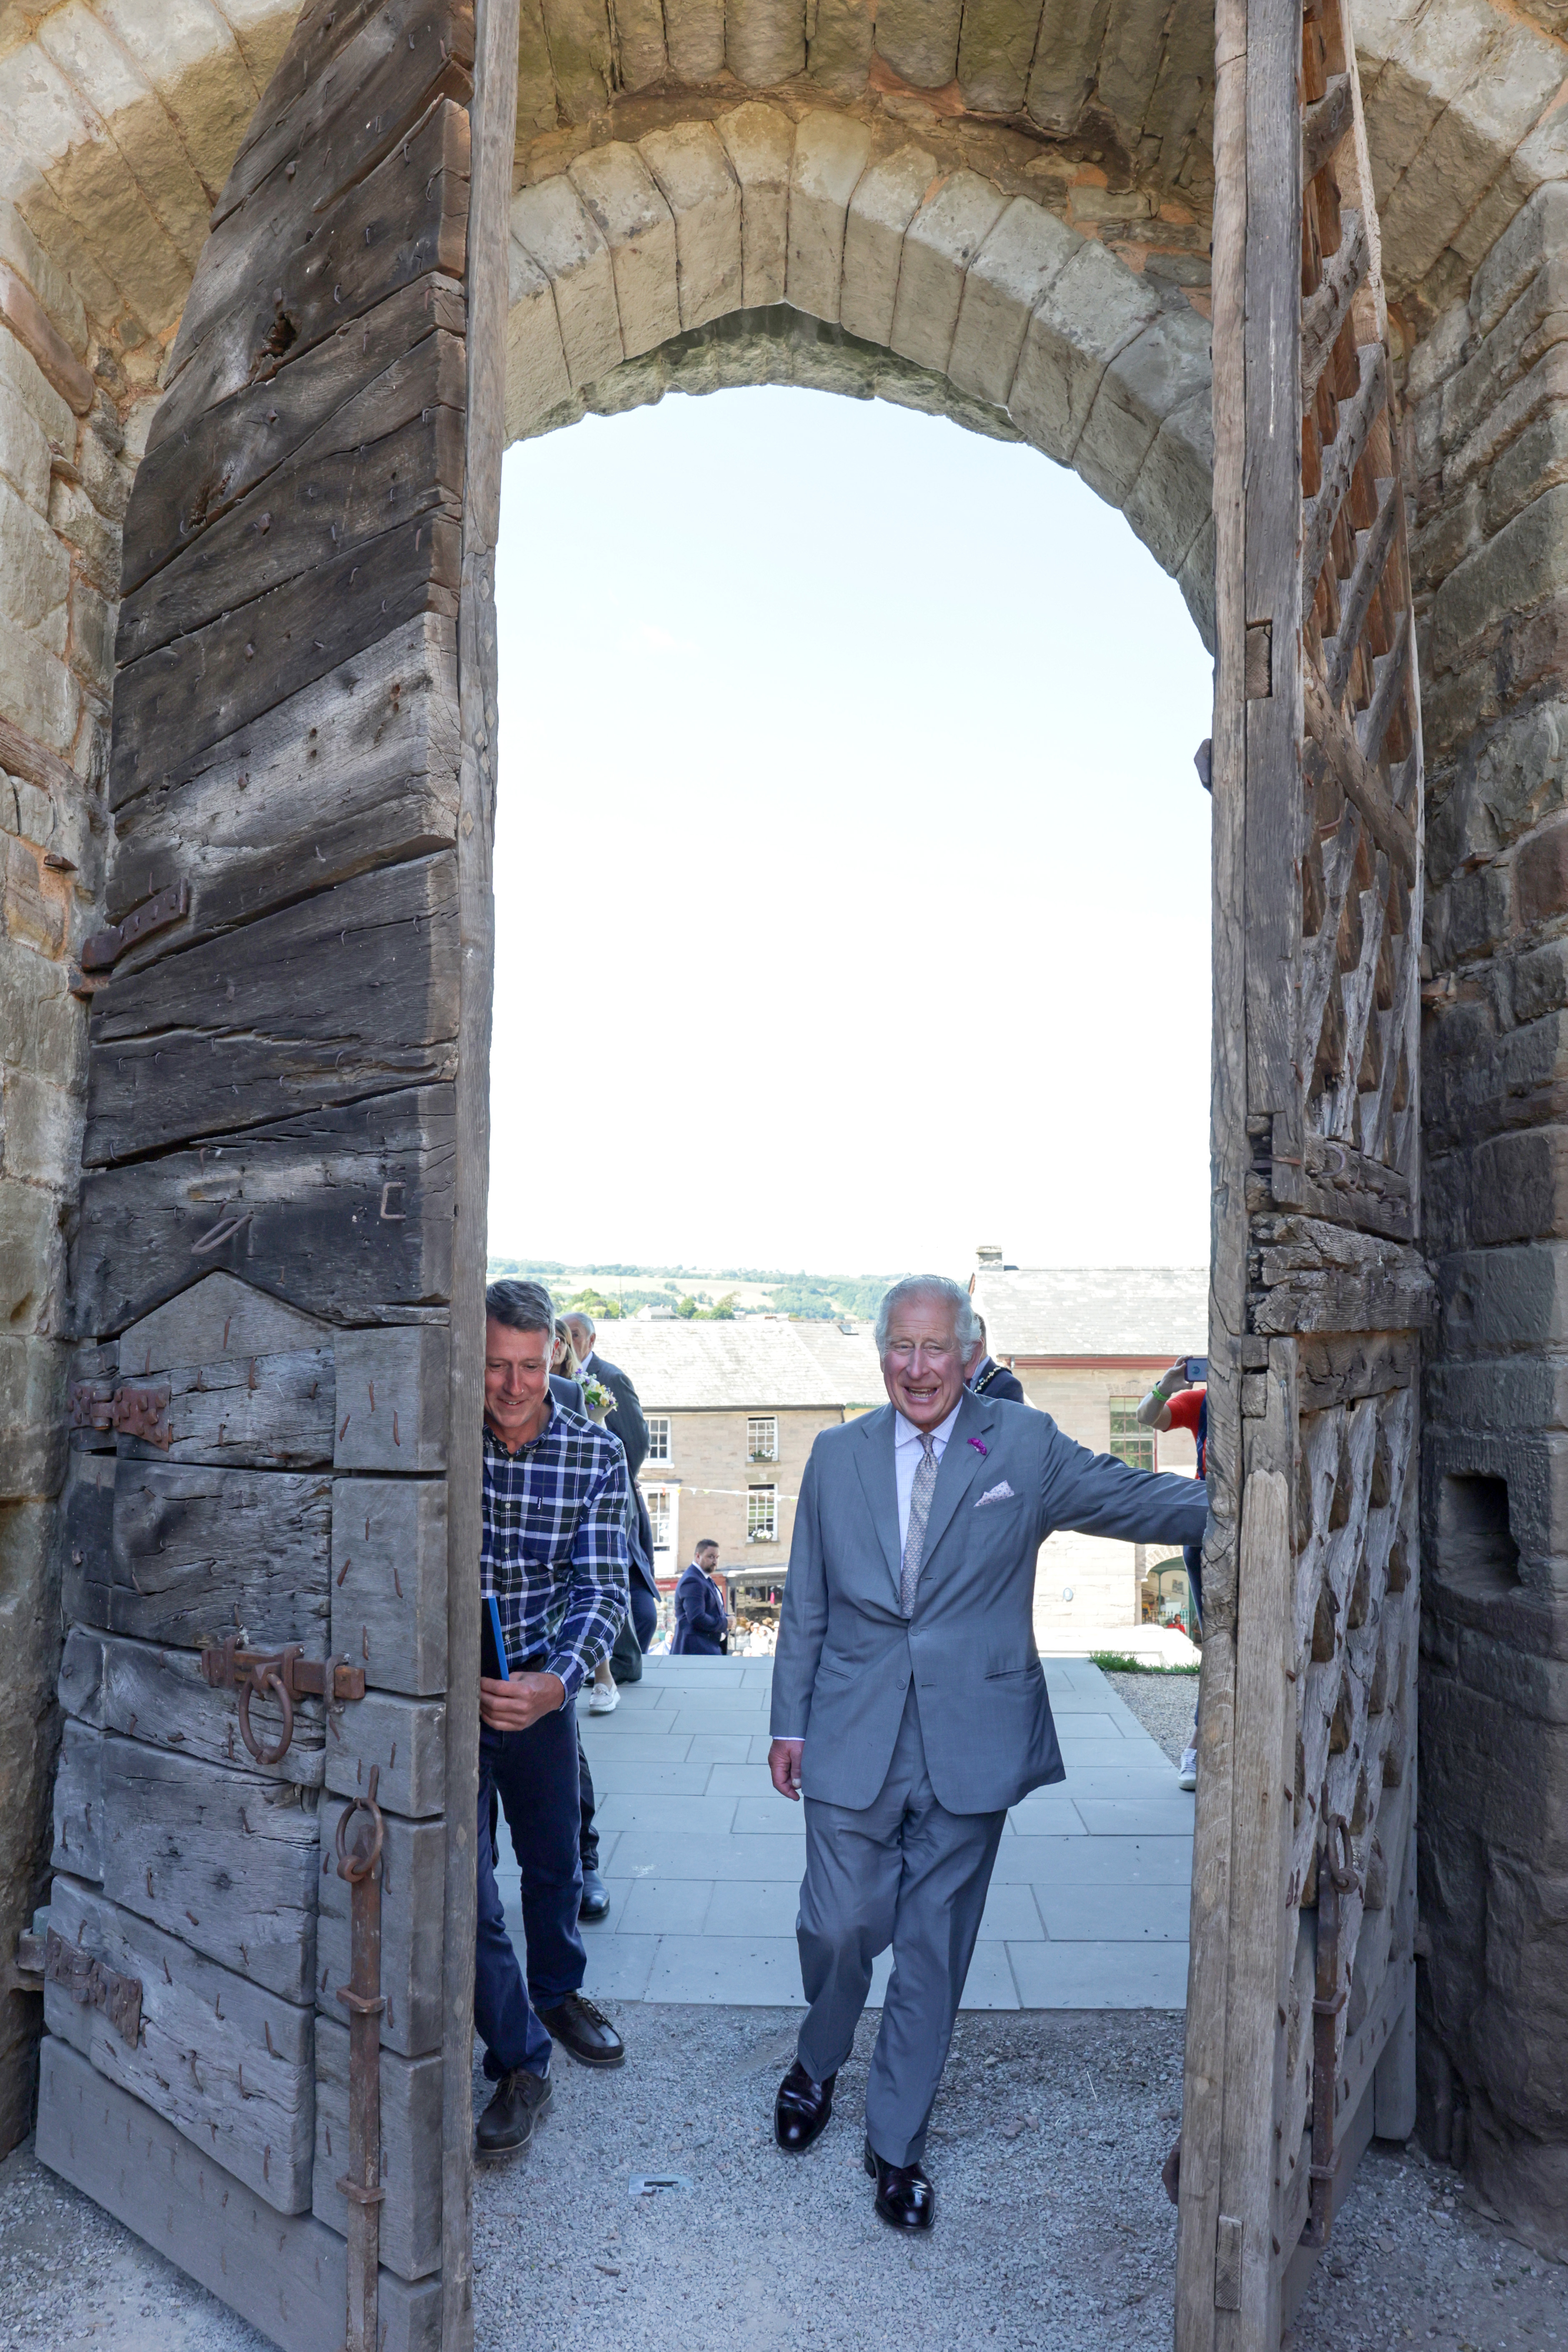 The Prince of Wales at Hay Castle